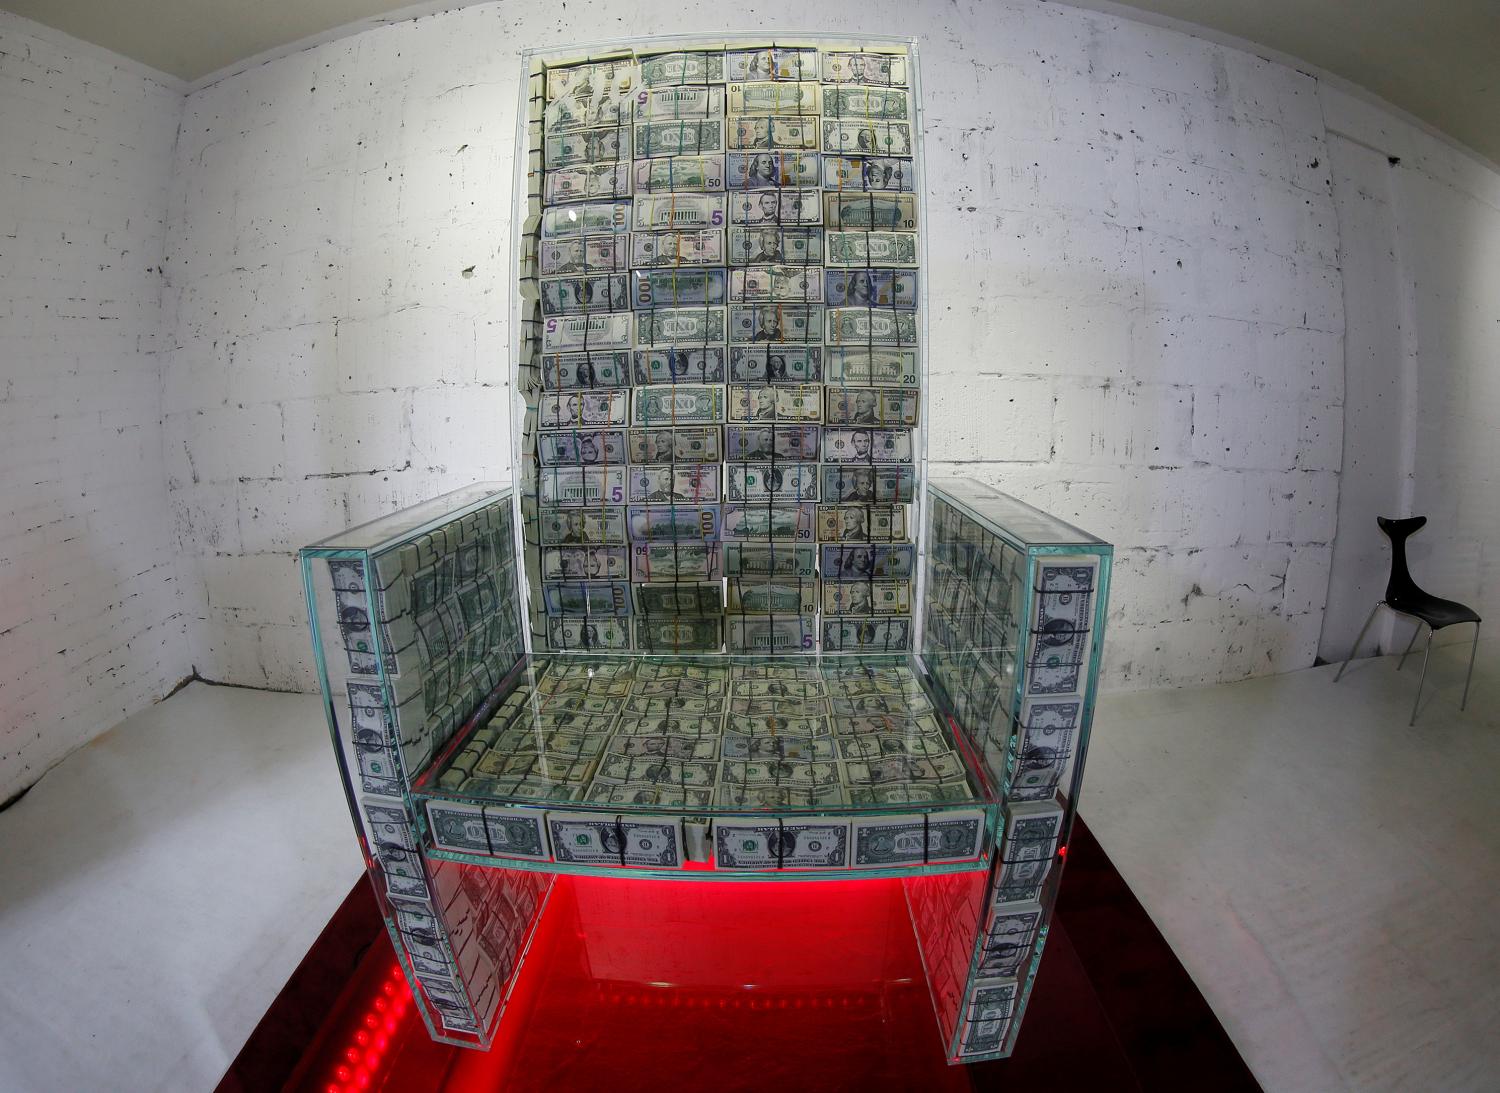 Art object "Money throne x10", a glass throne filled with $1 million, created by Russian artist Alexey Sergienko and entrepreneur Igor Rybakov, is seen during a presentation in Moscow Russia November 29, 2019. Picture taken November 29, 2019. REUTERS/Tatyana Makeyeva - RC2NLD9CFZXA